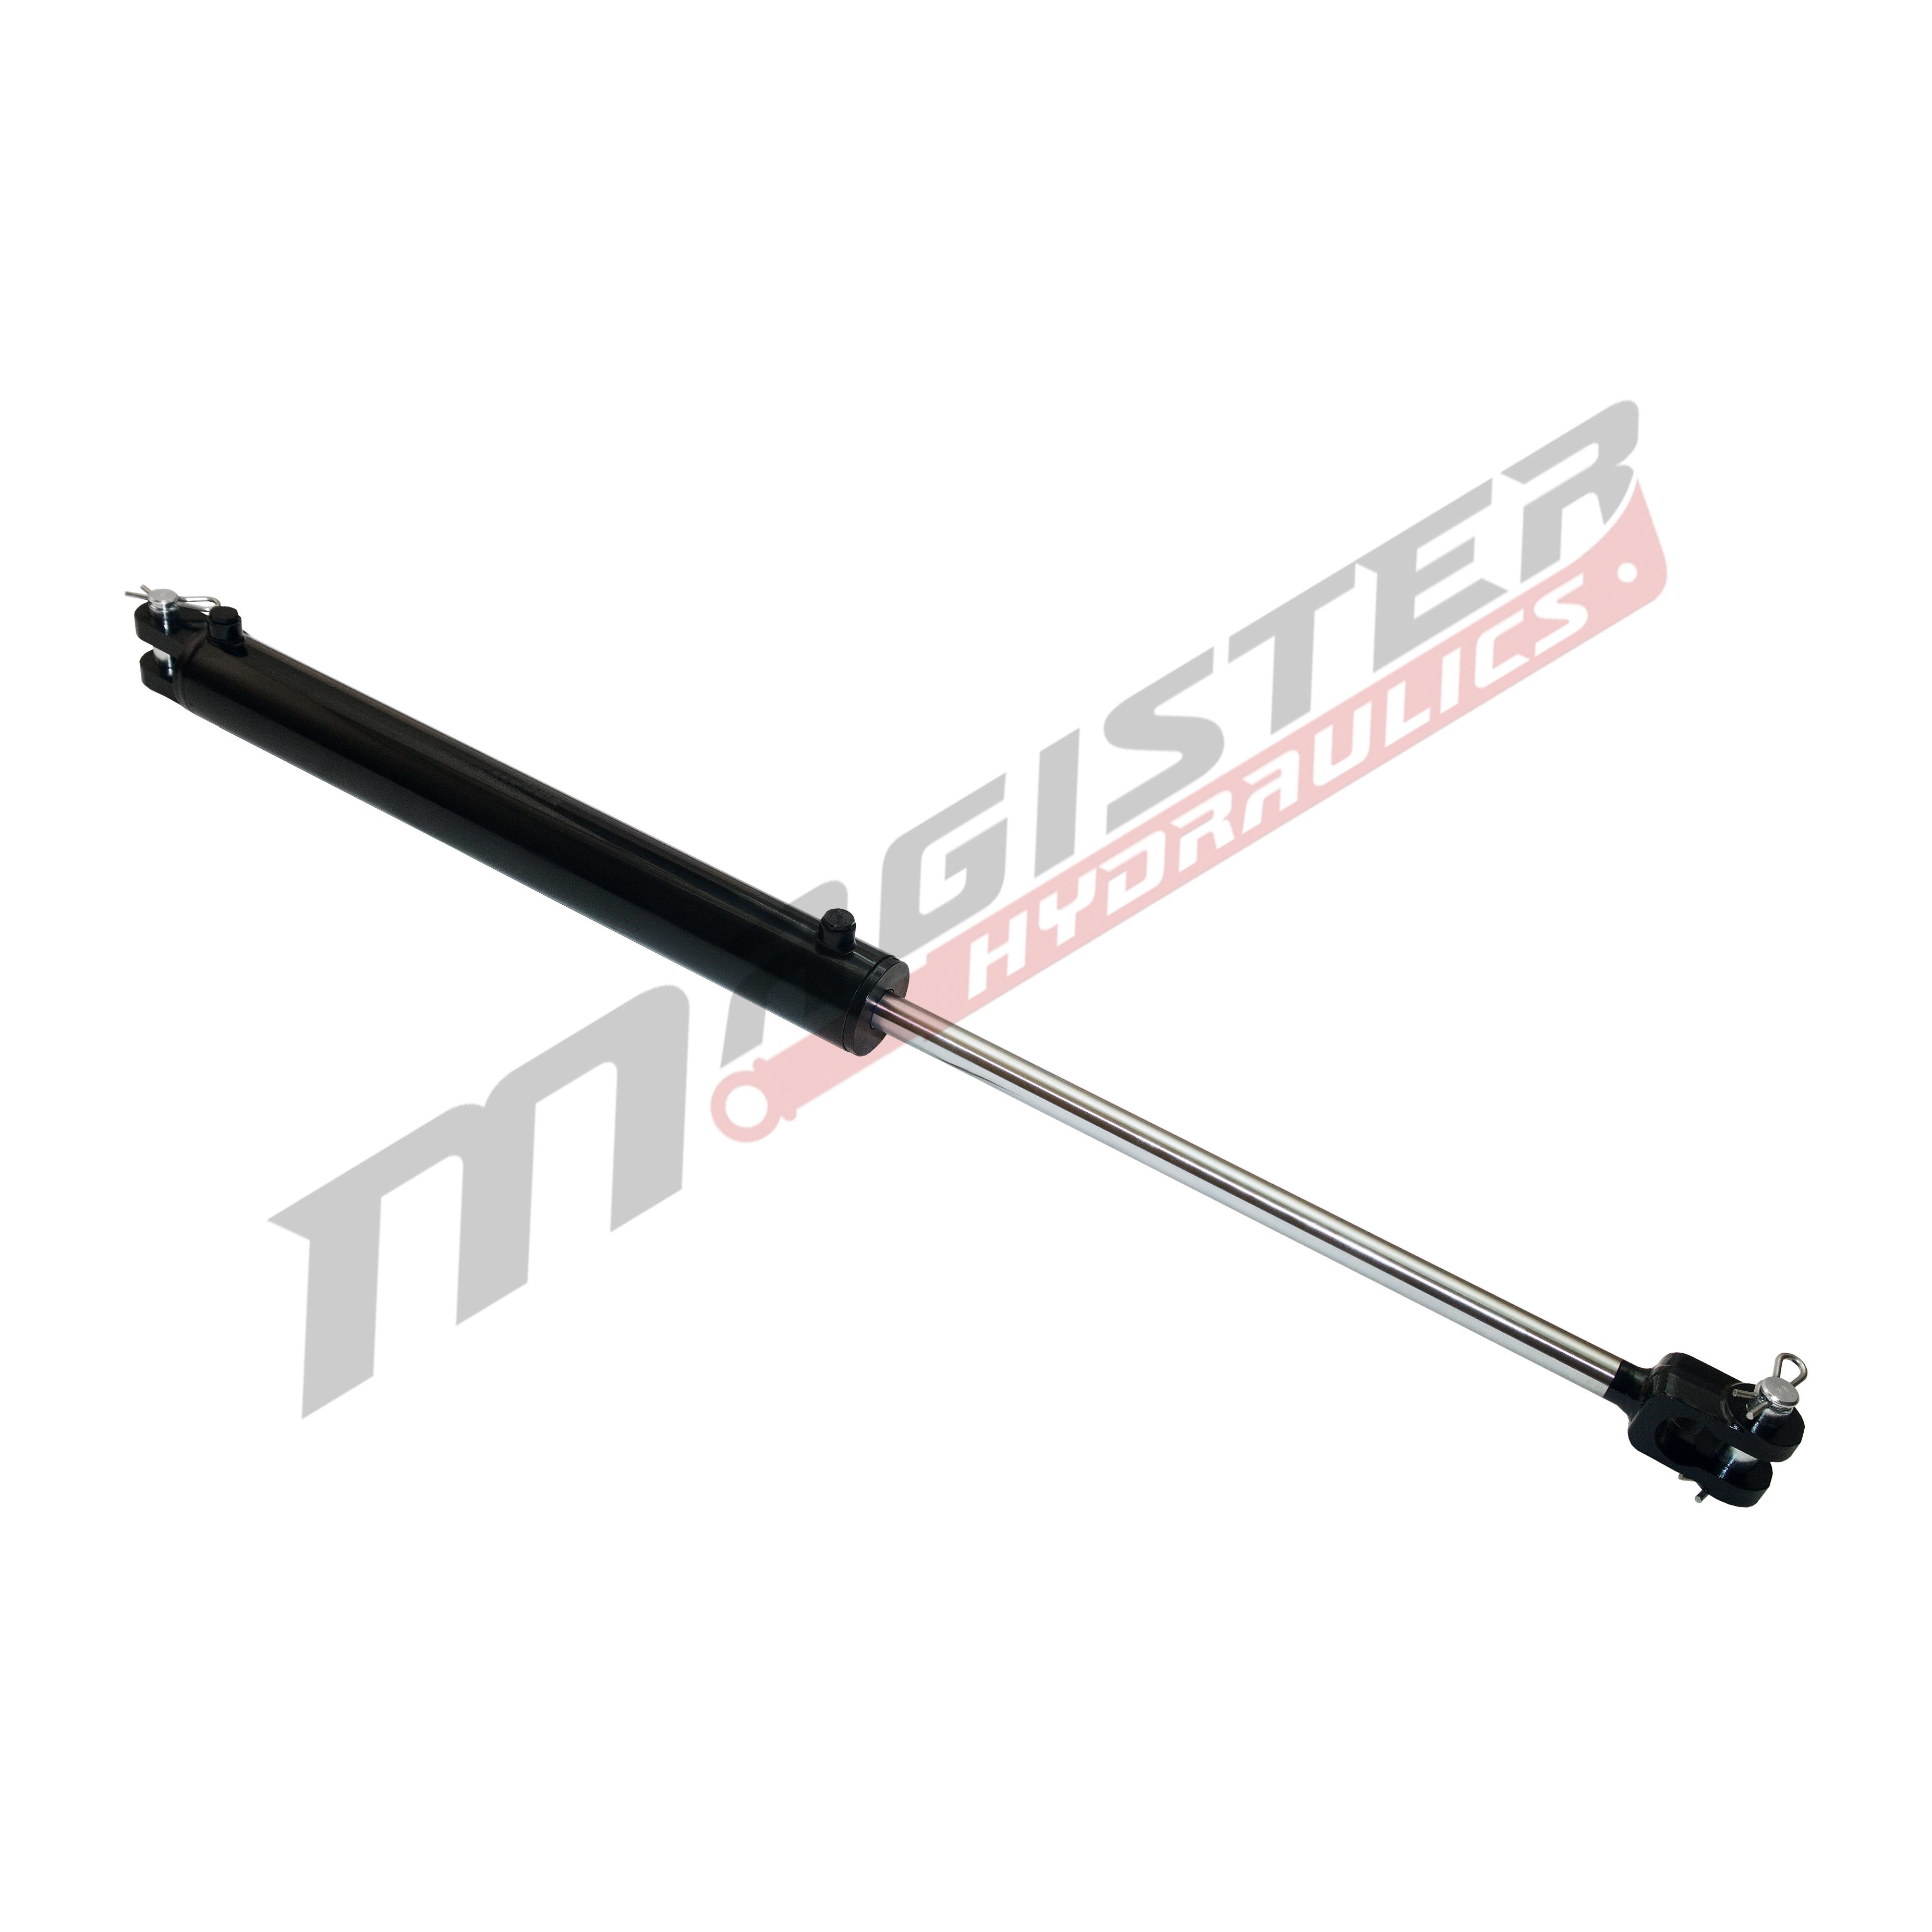 3.5 bore x 16 stroke hydraulic cylinder, ag clevis double acting cylinder | Magister Hydraulics